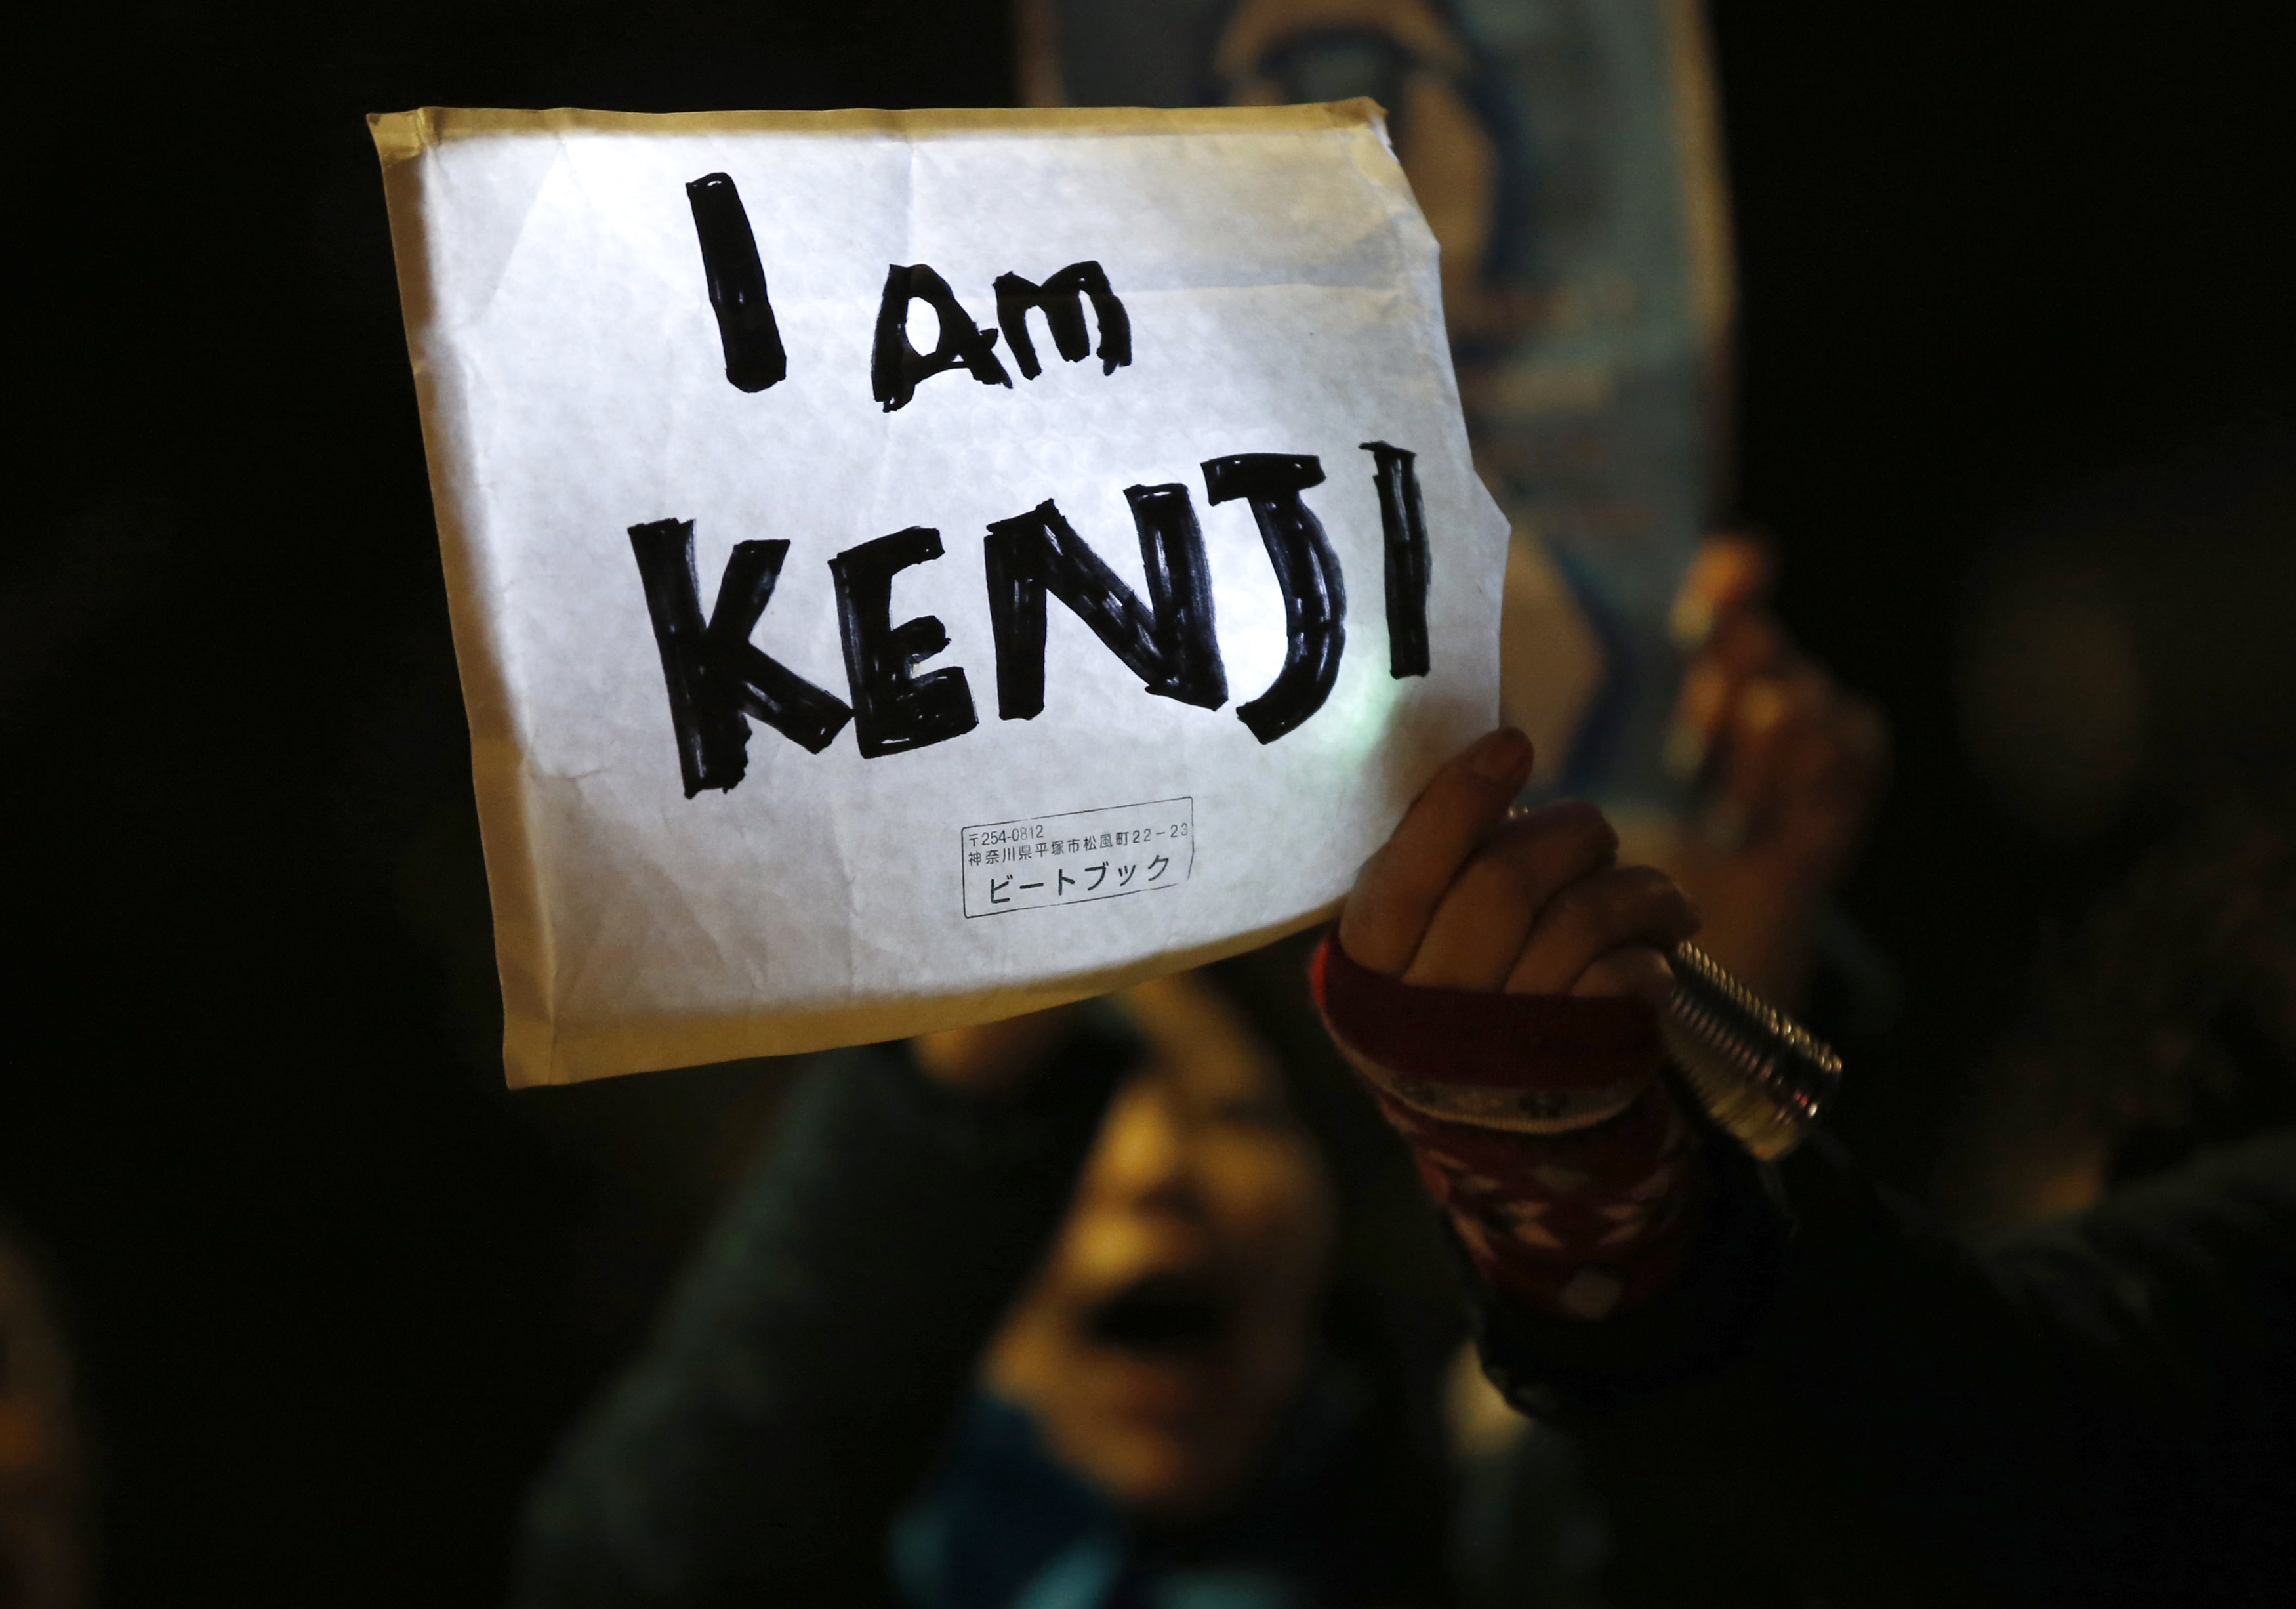 A protester holding a placard chants "Save Kenji" during a demonstration in front of the Prime Minister's Official residence in Tokyo before news of Goto's beheading was circulated, REUTERS/Toru Hanai